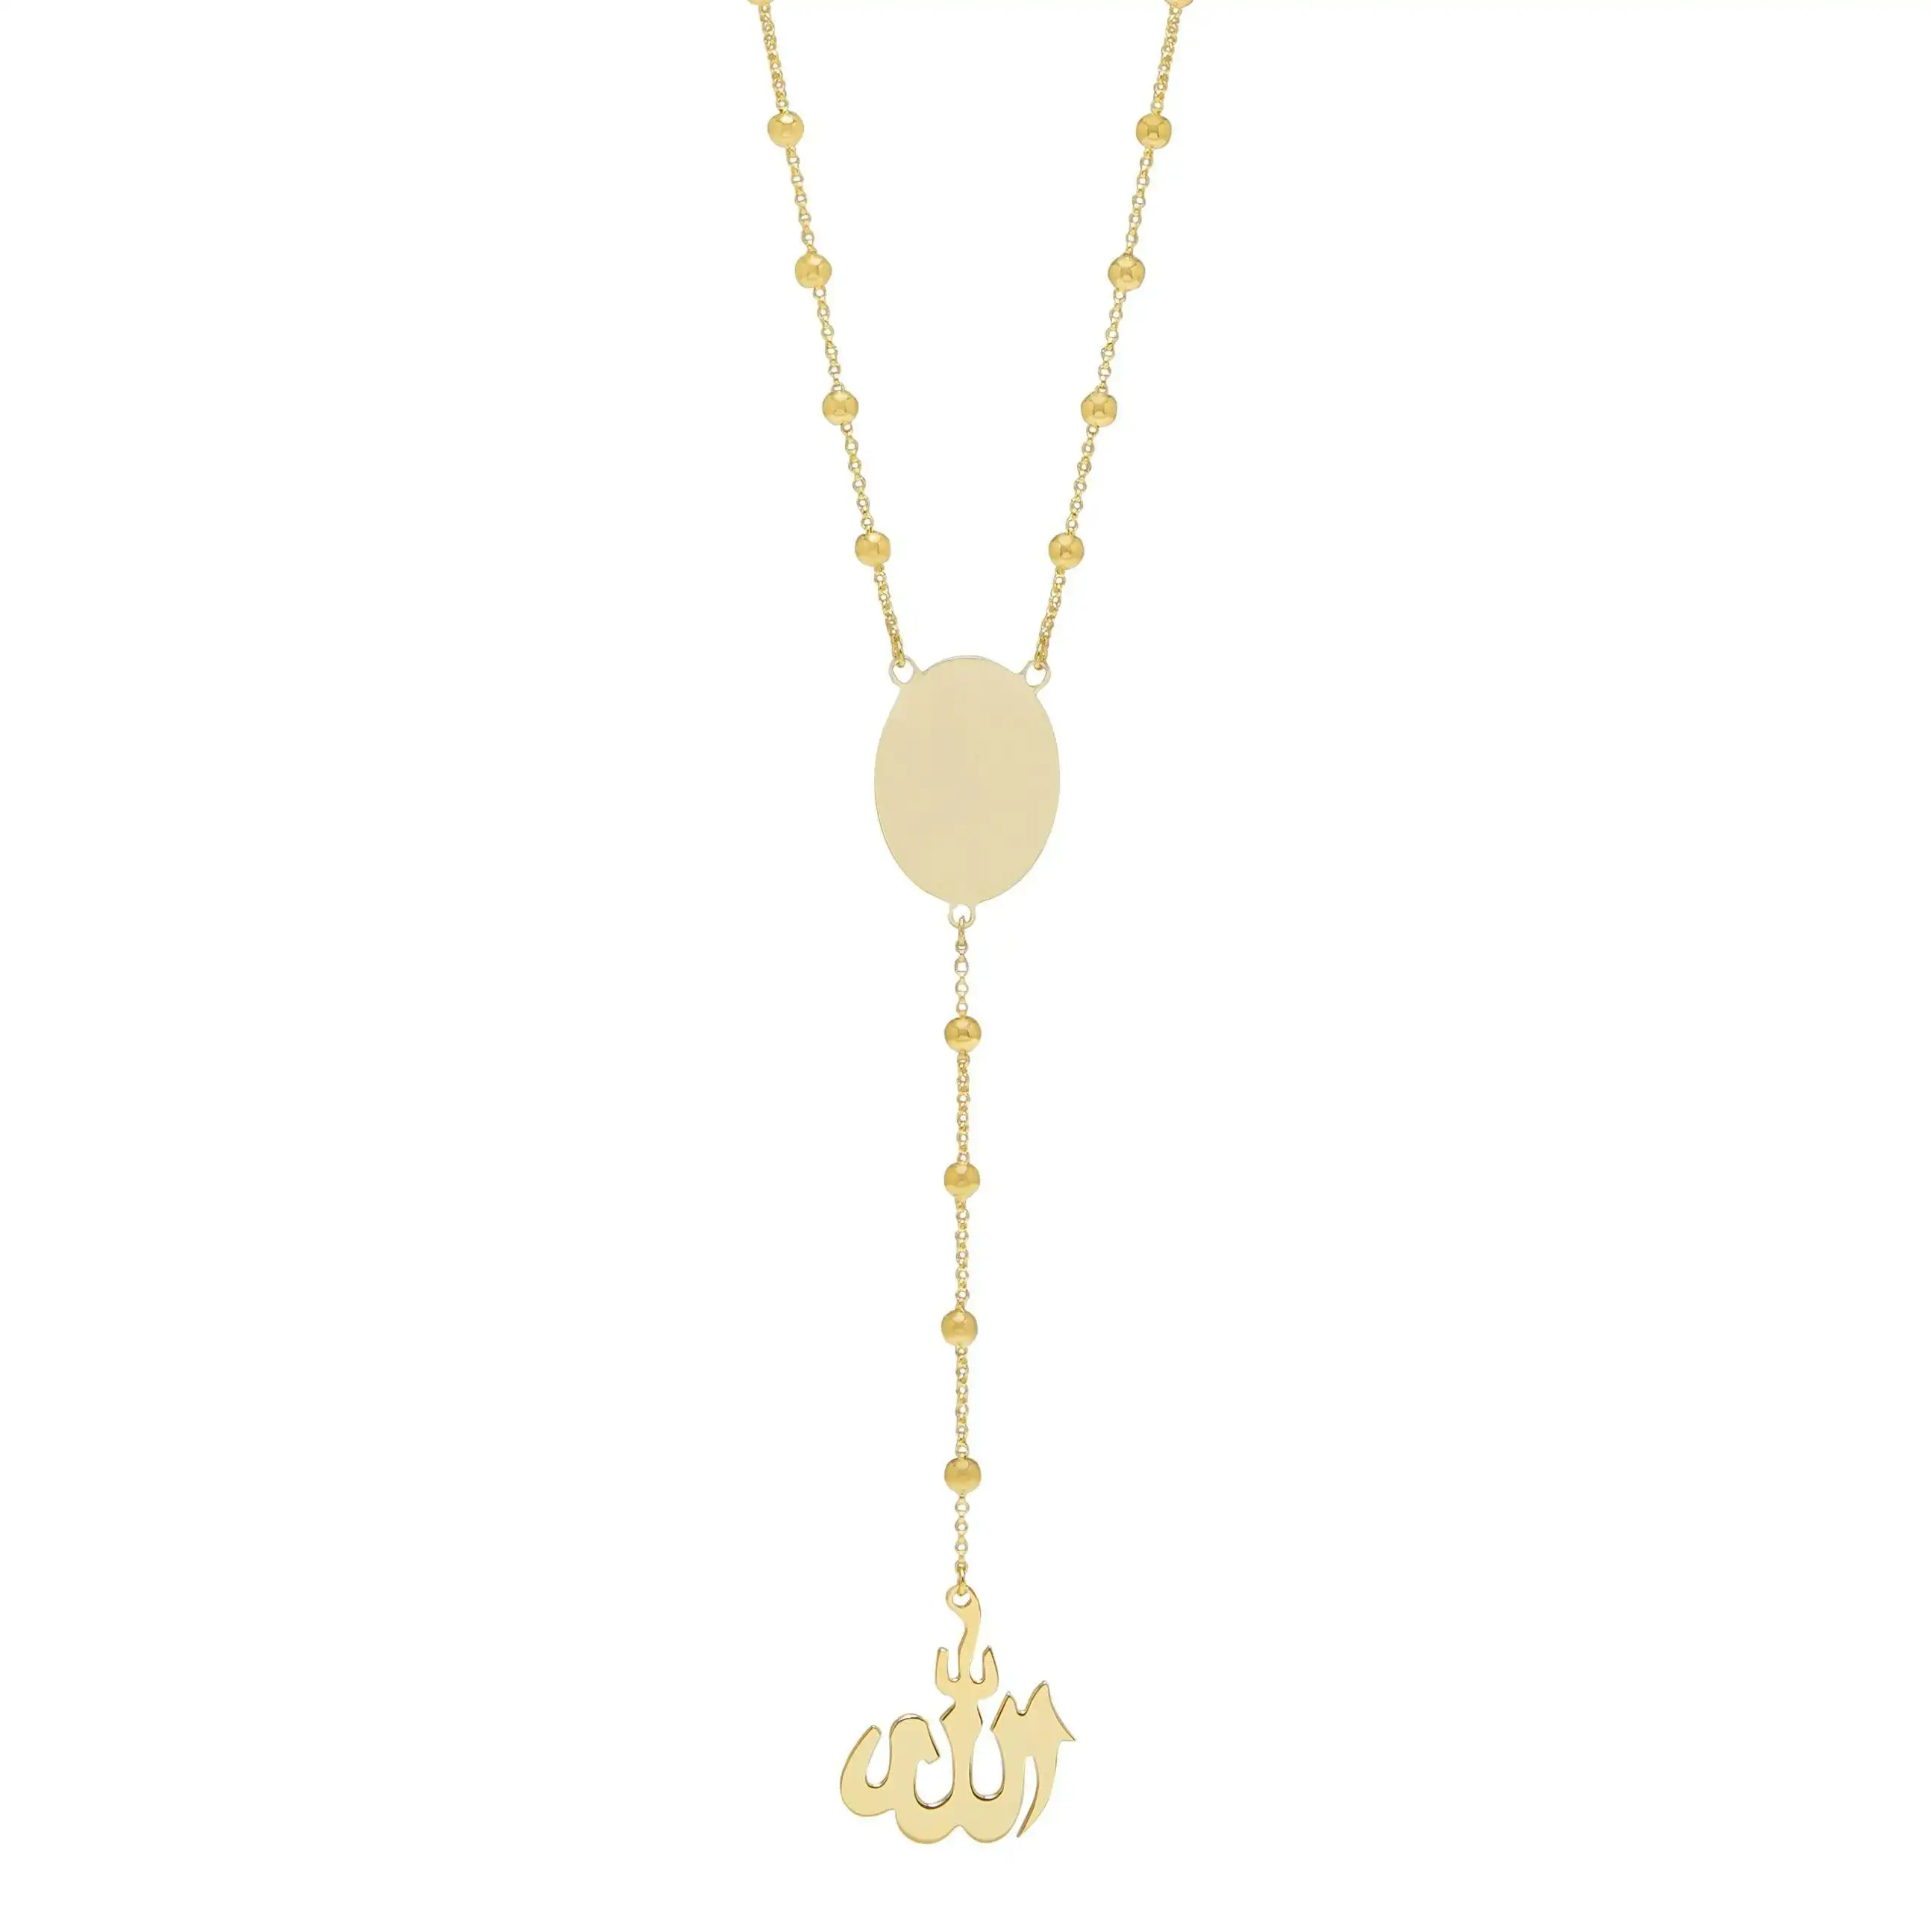 Islamic Rosary Necklace 50cm in 9ct Yellow Gold Silver Infused